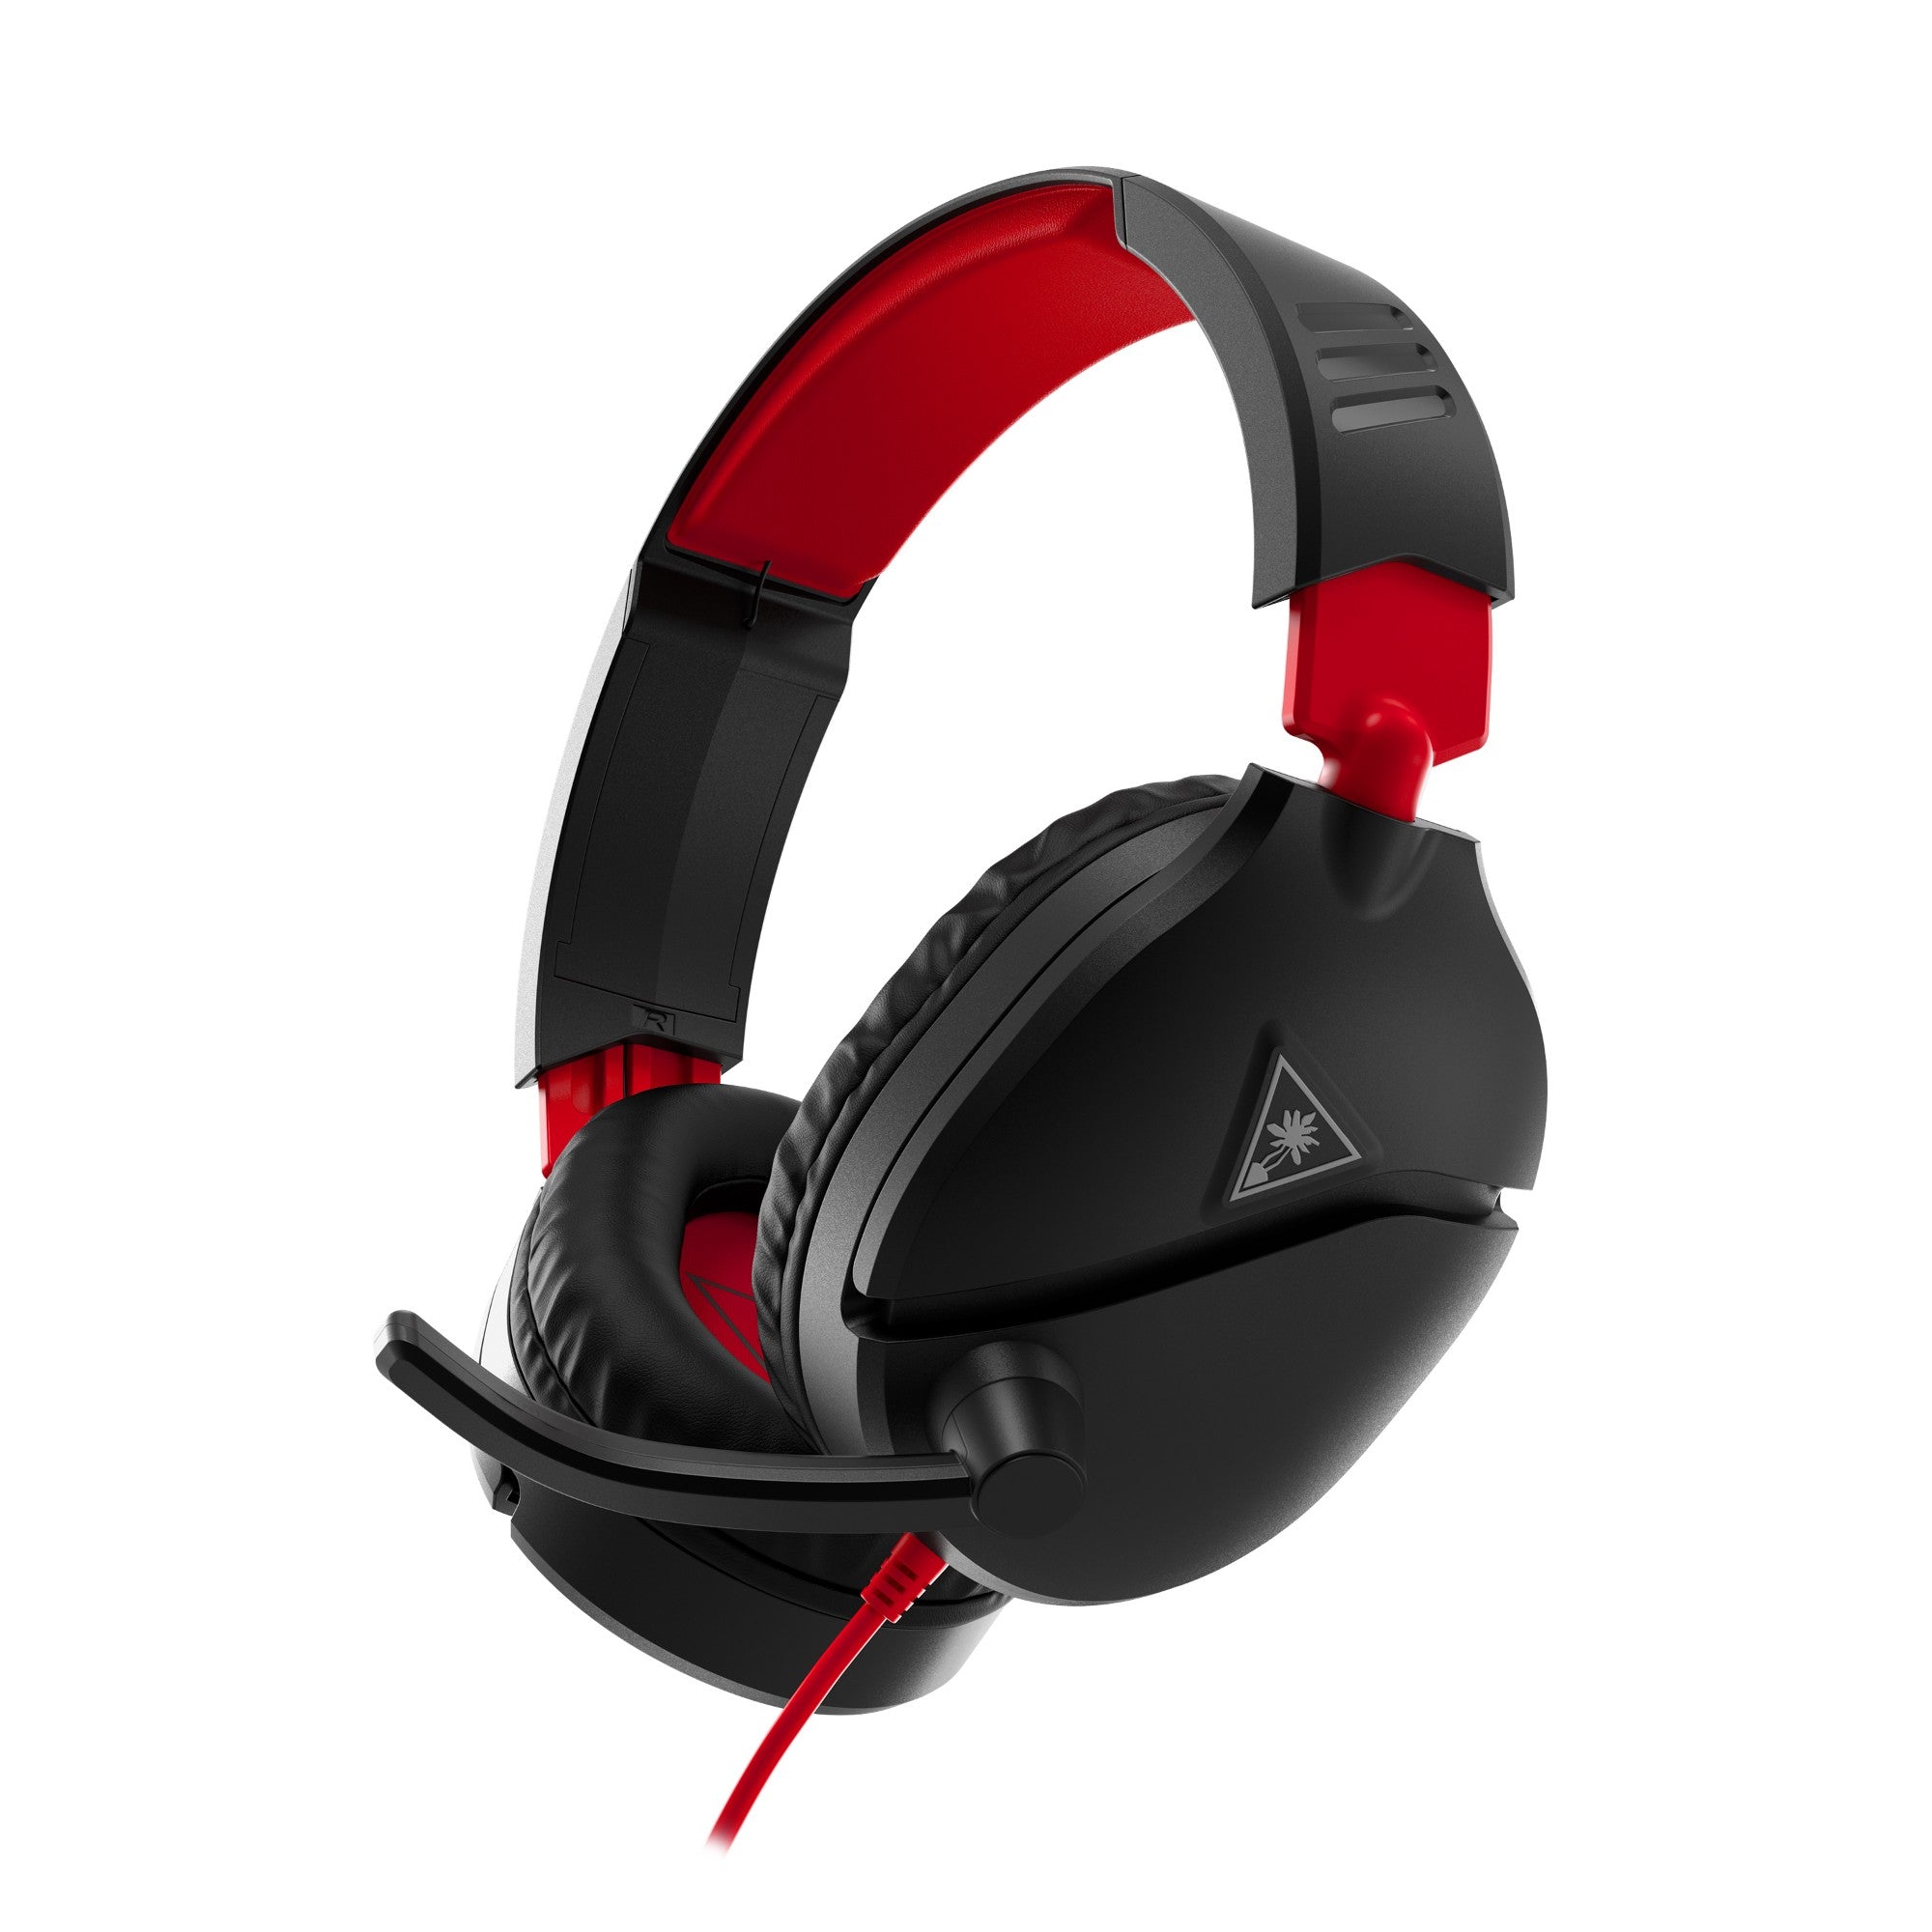 Recon 70 Gaming Headset for Nintendo Switch